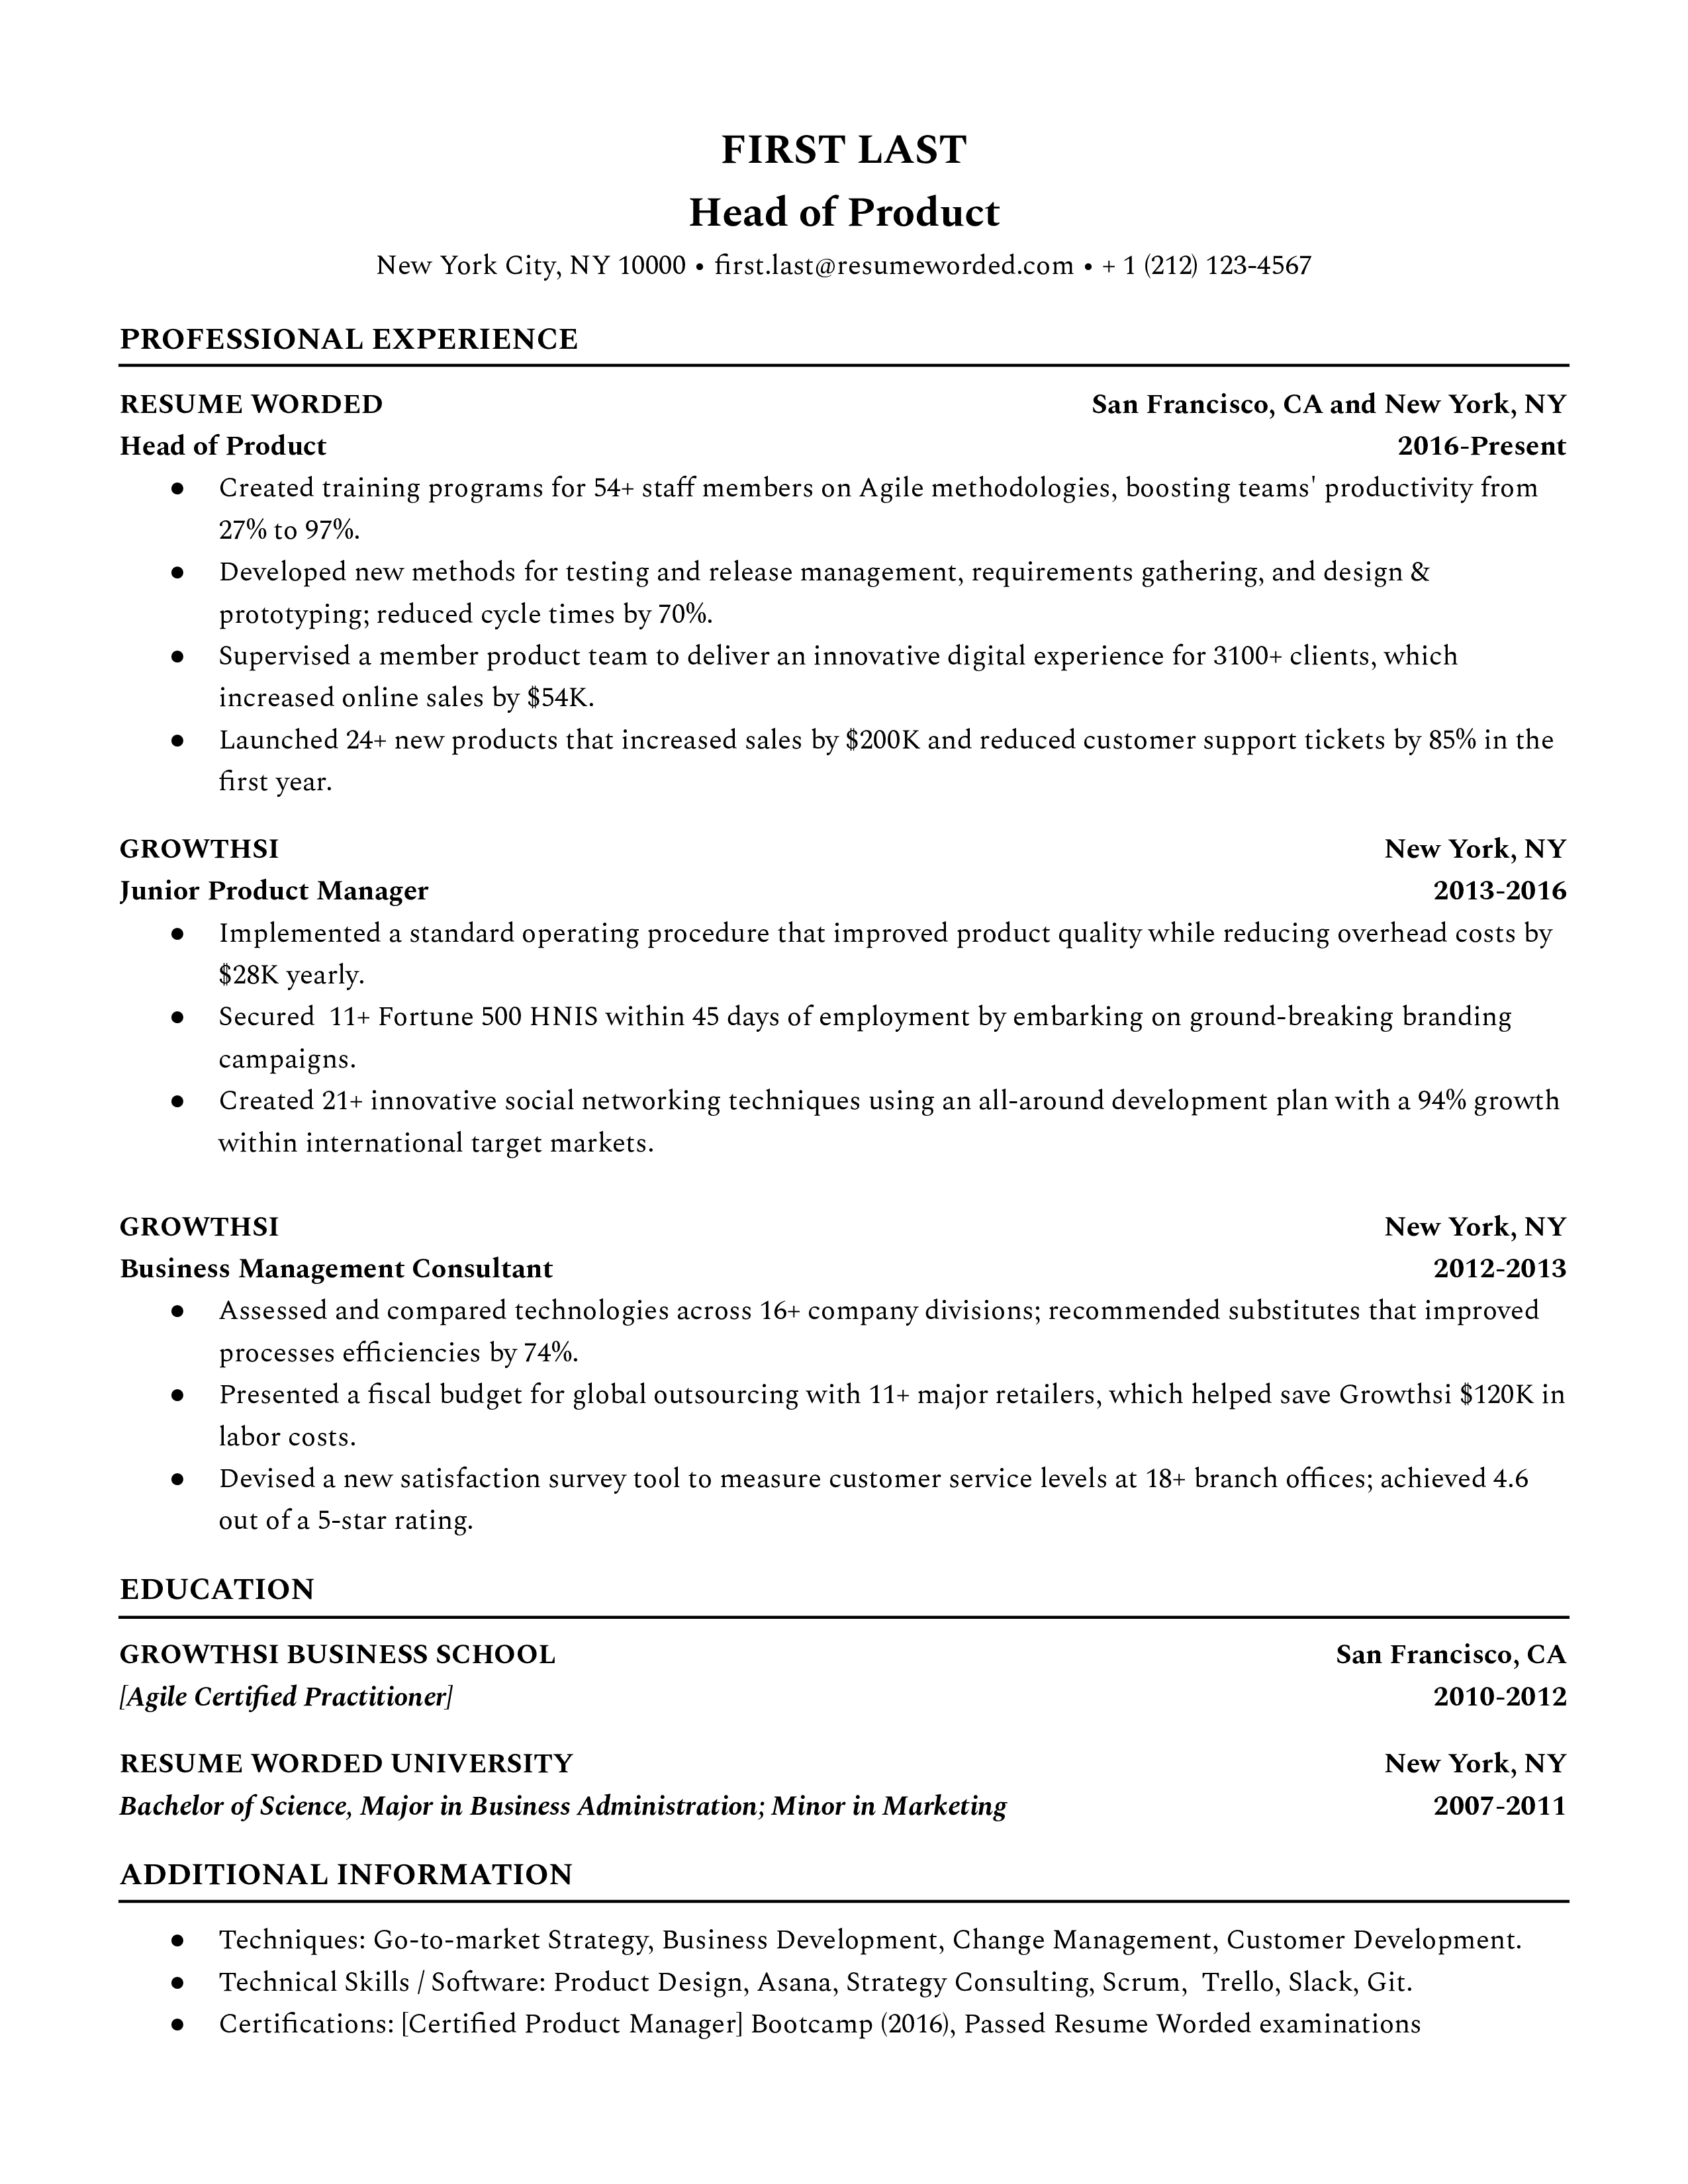 Screenshot of a Head of Product resume featuring product lifecycle experience and collaboration highlights.